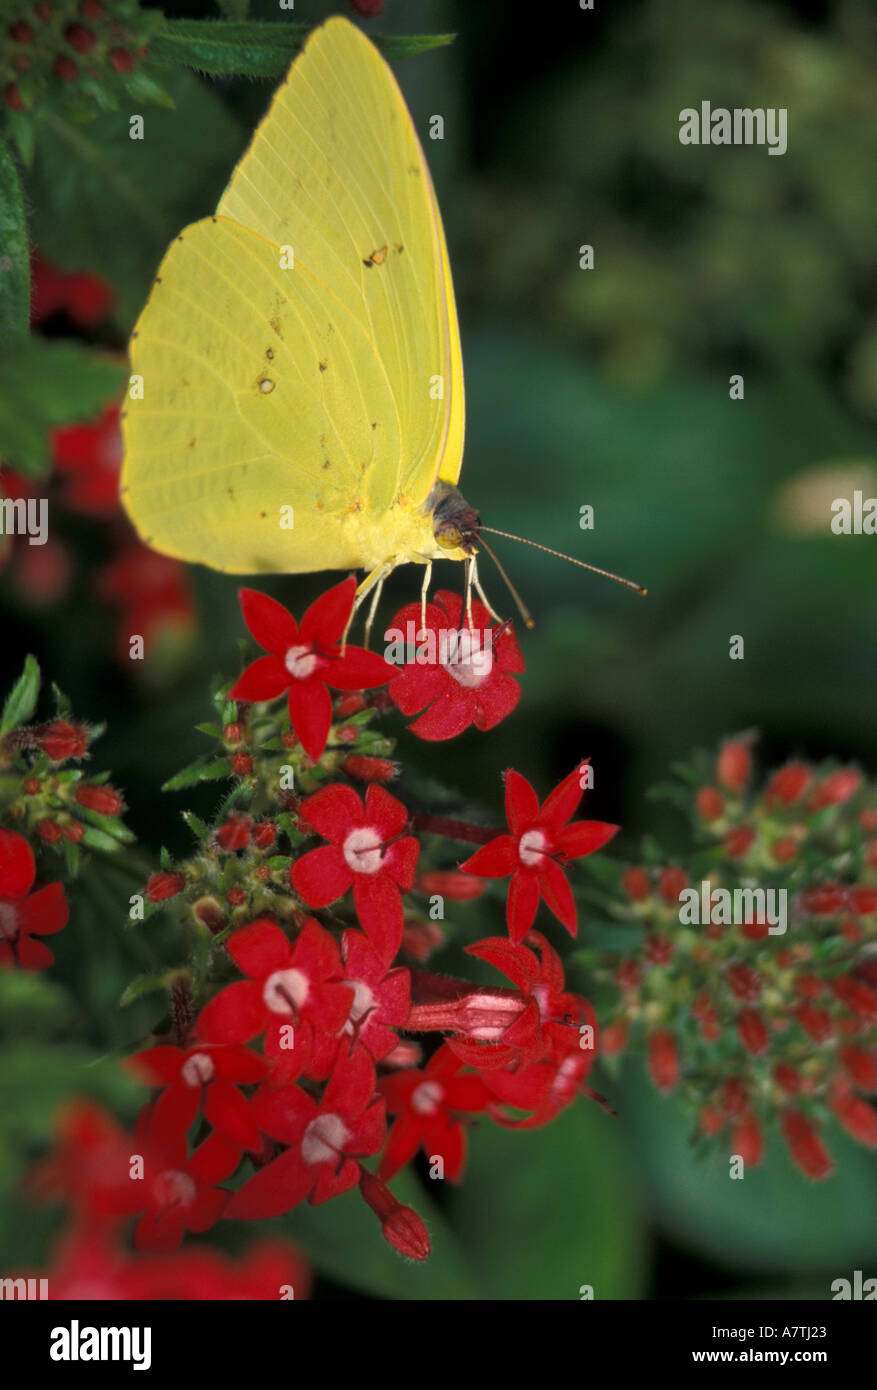 North America, USA, WA, Seattle, Woodland Park Zoo, Cloudless Sulphur feeding on red Star Duster flower, Summer Stock Photo